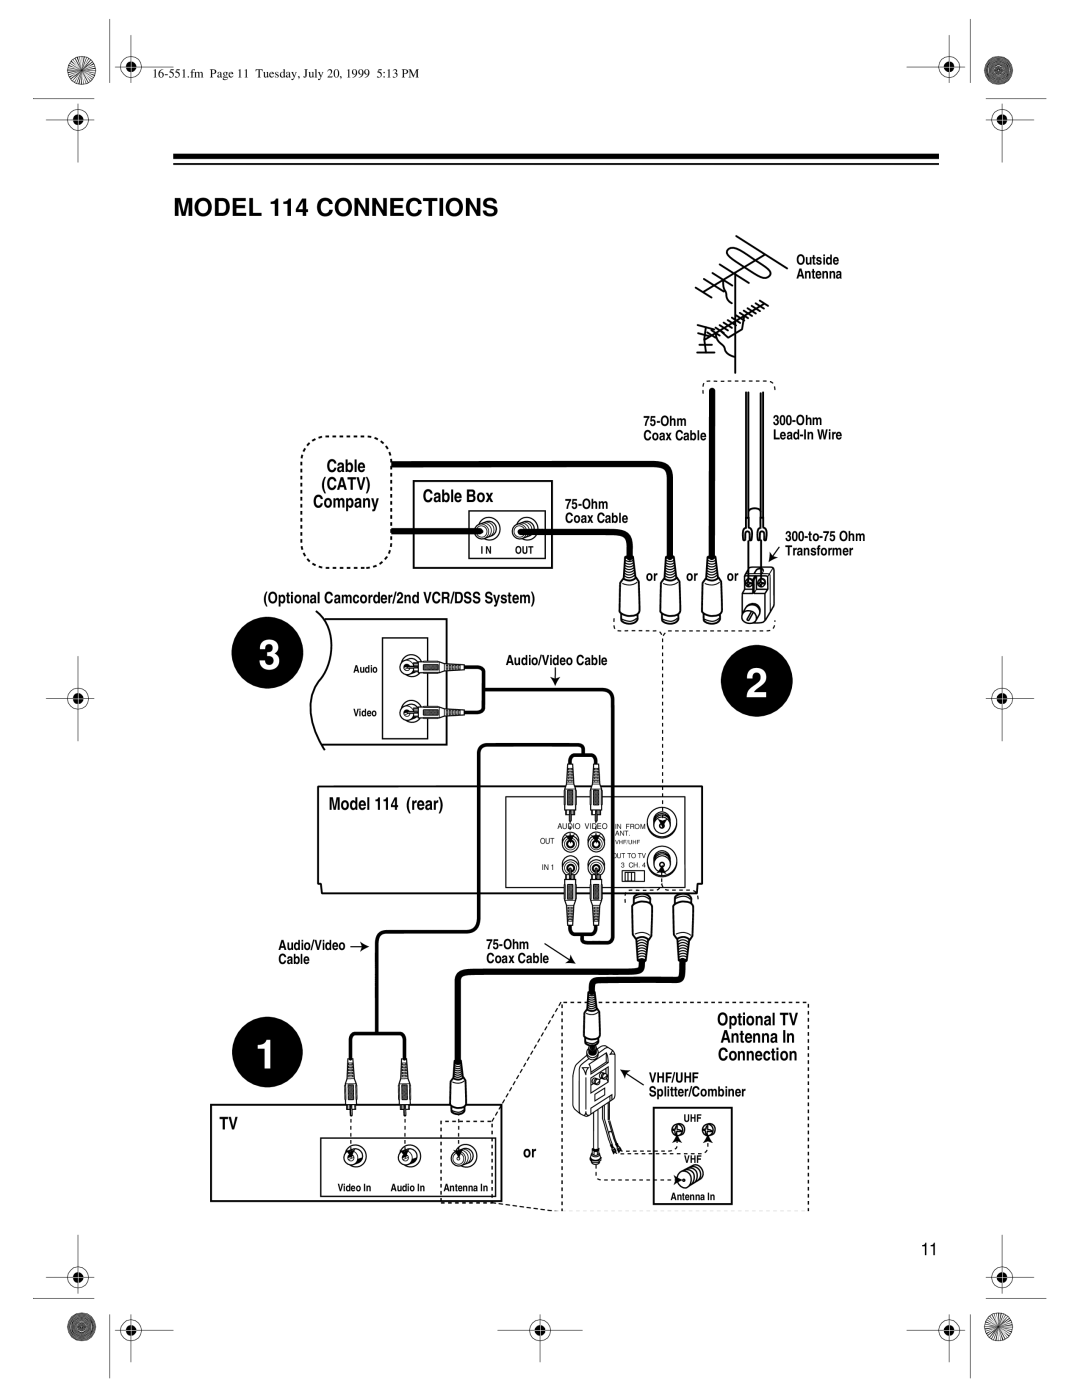 Optimus MODEL 114 CONNECTIONS, Catv, Company, fm Page 11 Tuesday, July 20, 1999 513 PM, Ohm Coax Cable, Antenna In 